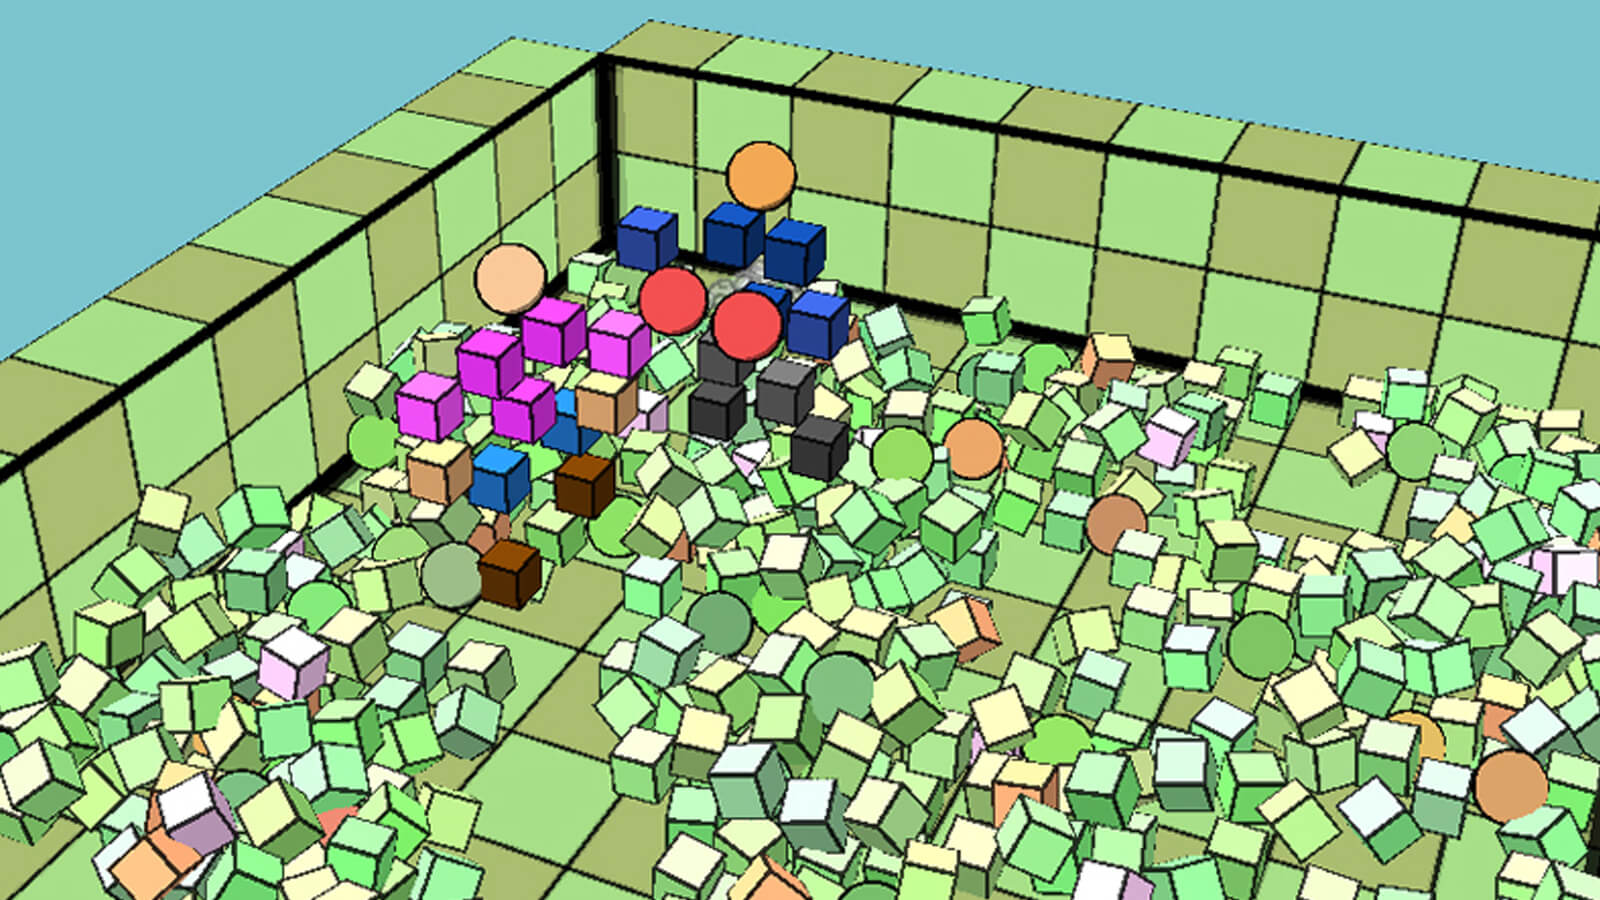 Two geometric people combat each other in a room littered with cubes.